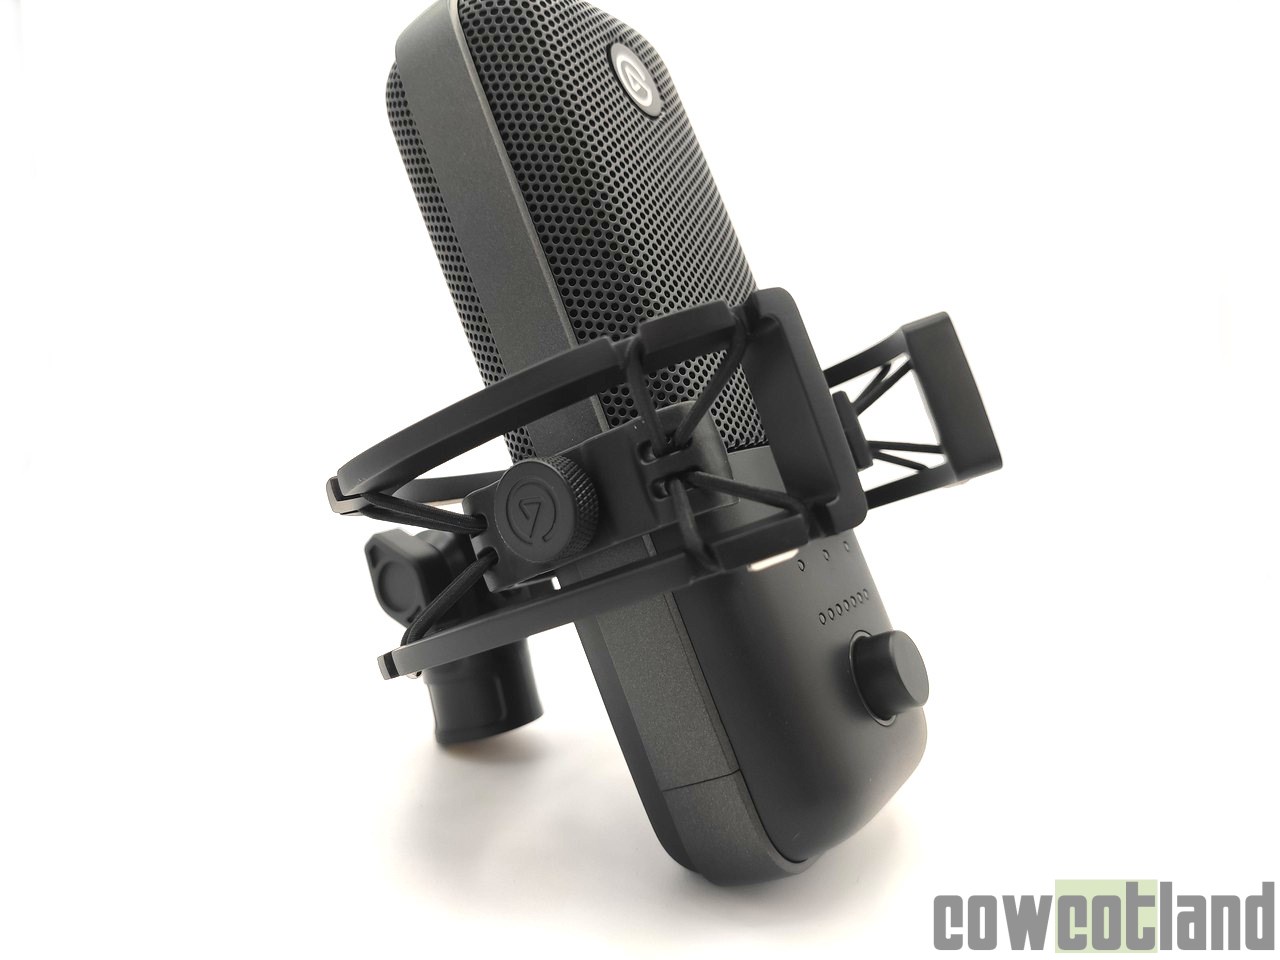 Image 44892, galerie Test Elgato Wave:3, un microphone cardiode USB taill pour le streaming